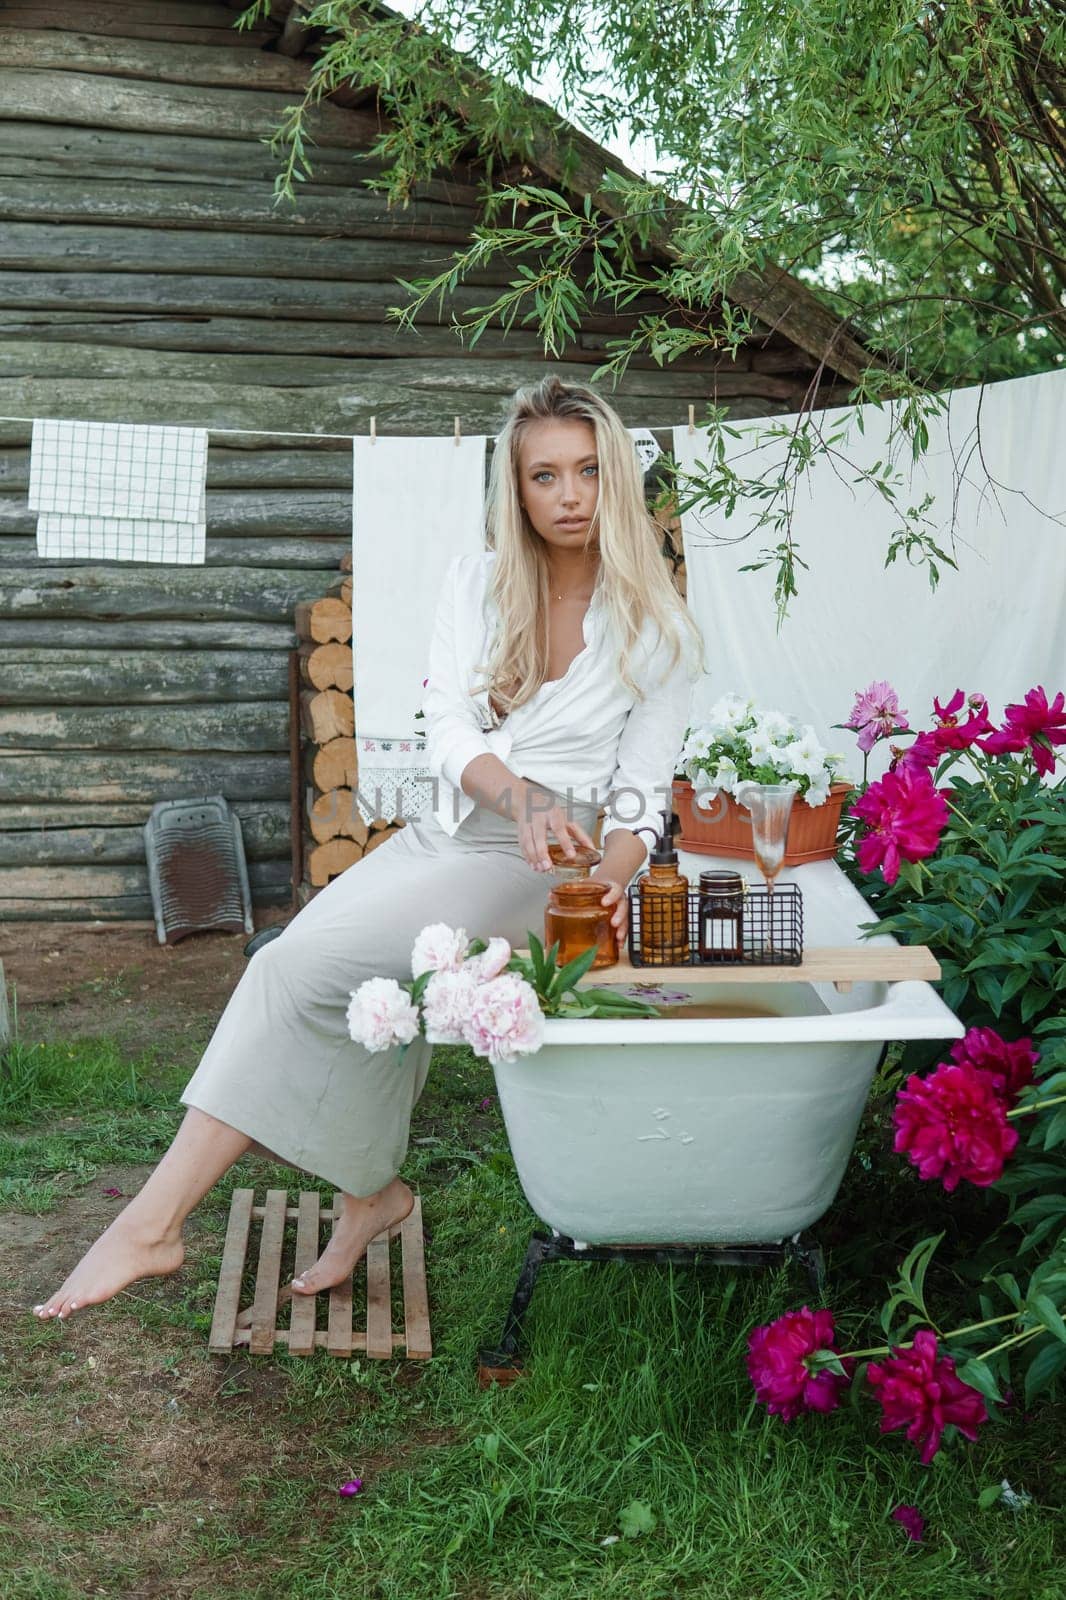 A woman is sitting on a cast-iron bathtub in the courtyard of a country house next to a bush of flowering peonies. The concept of summer, country life, a bathroom on the street in a blooming garden in the country. by Annu1tochka